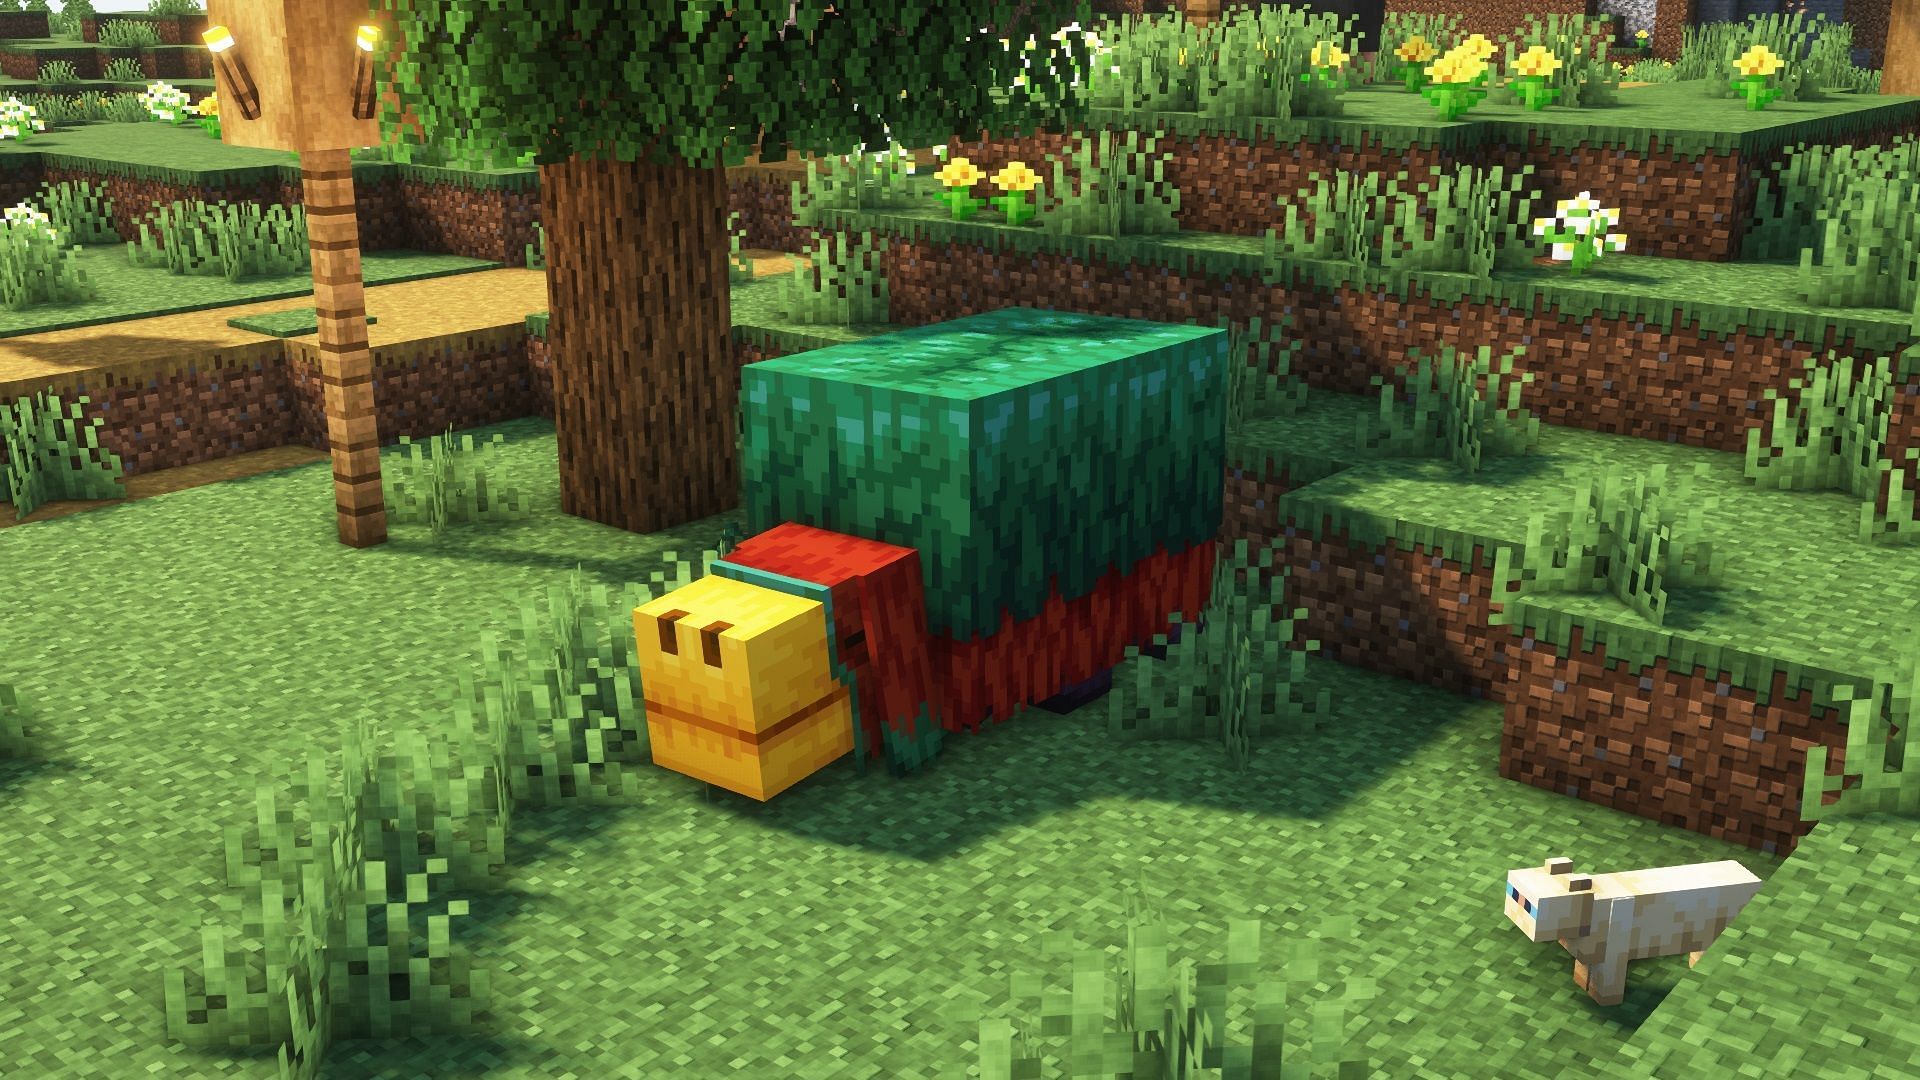 A sniffer in the game (Image via Mojang)